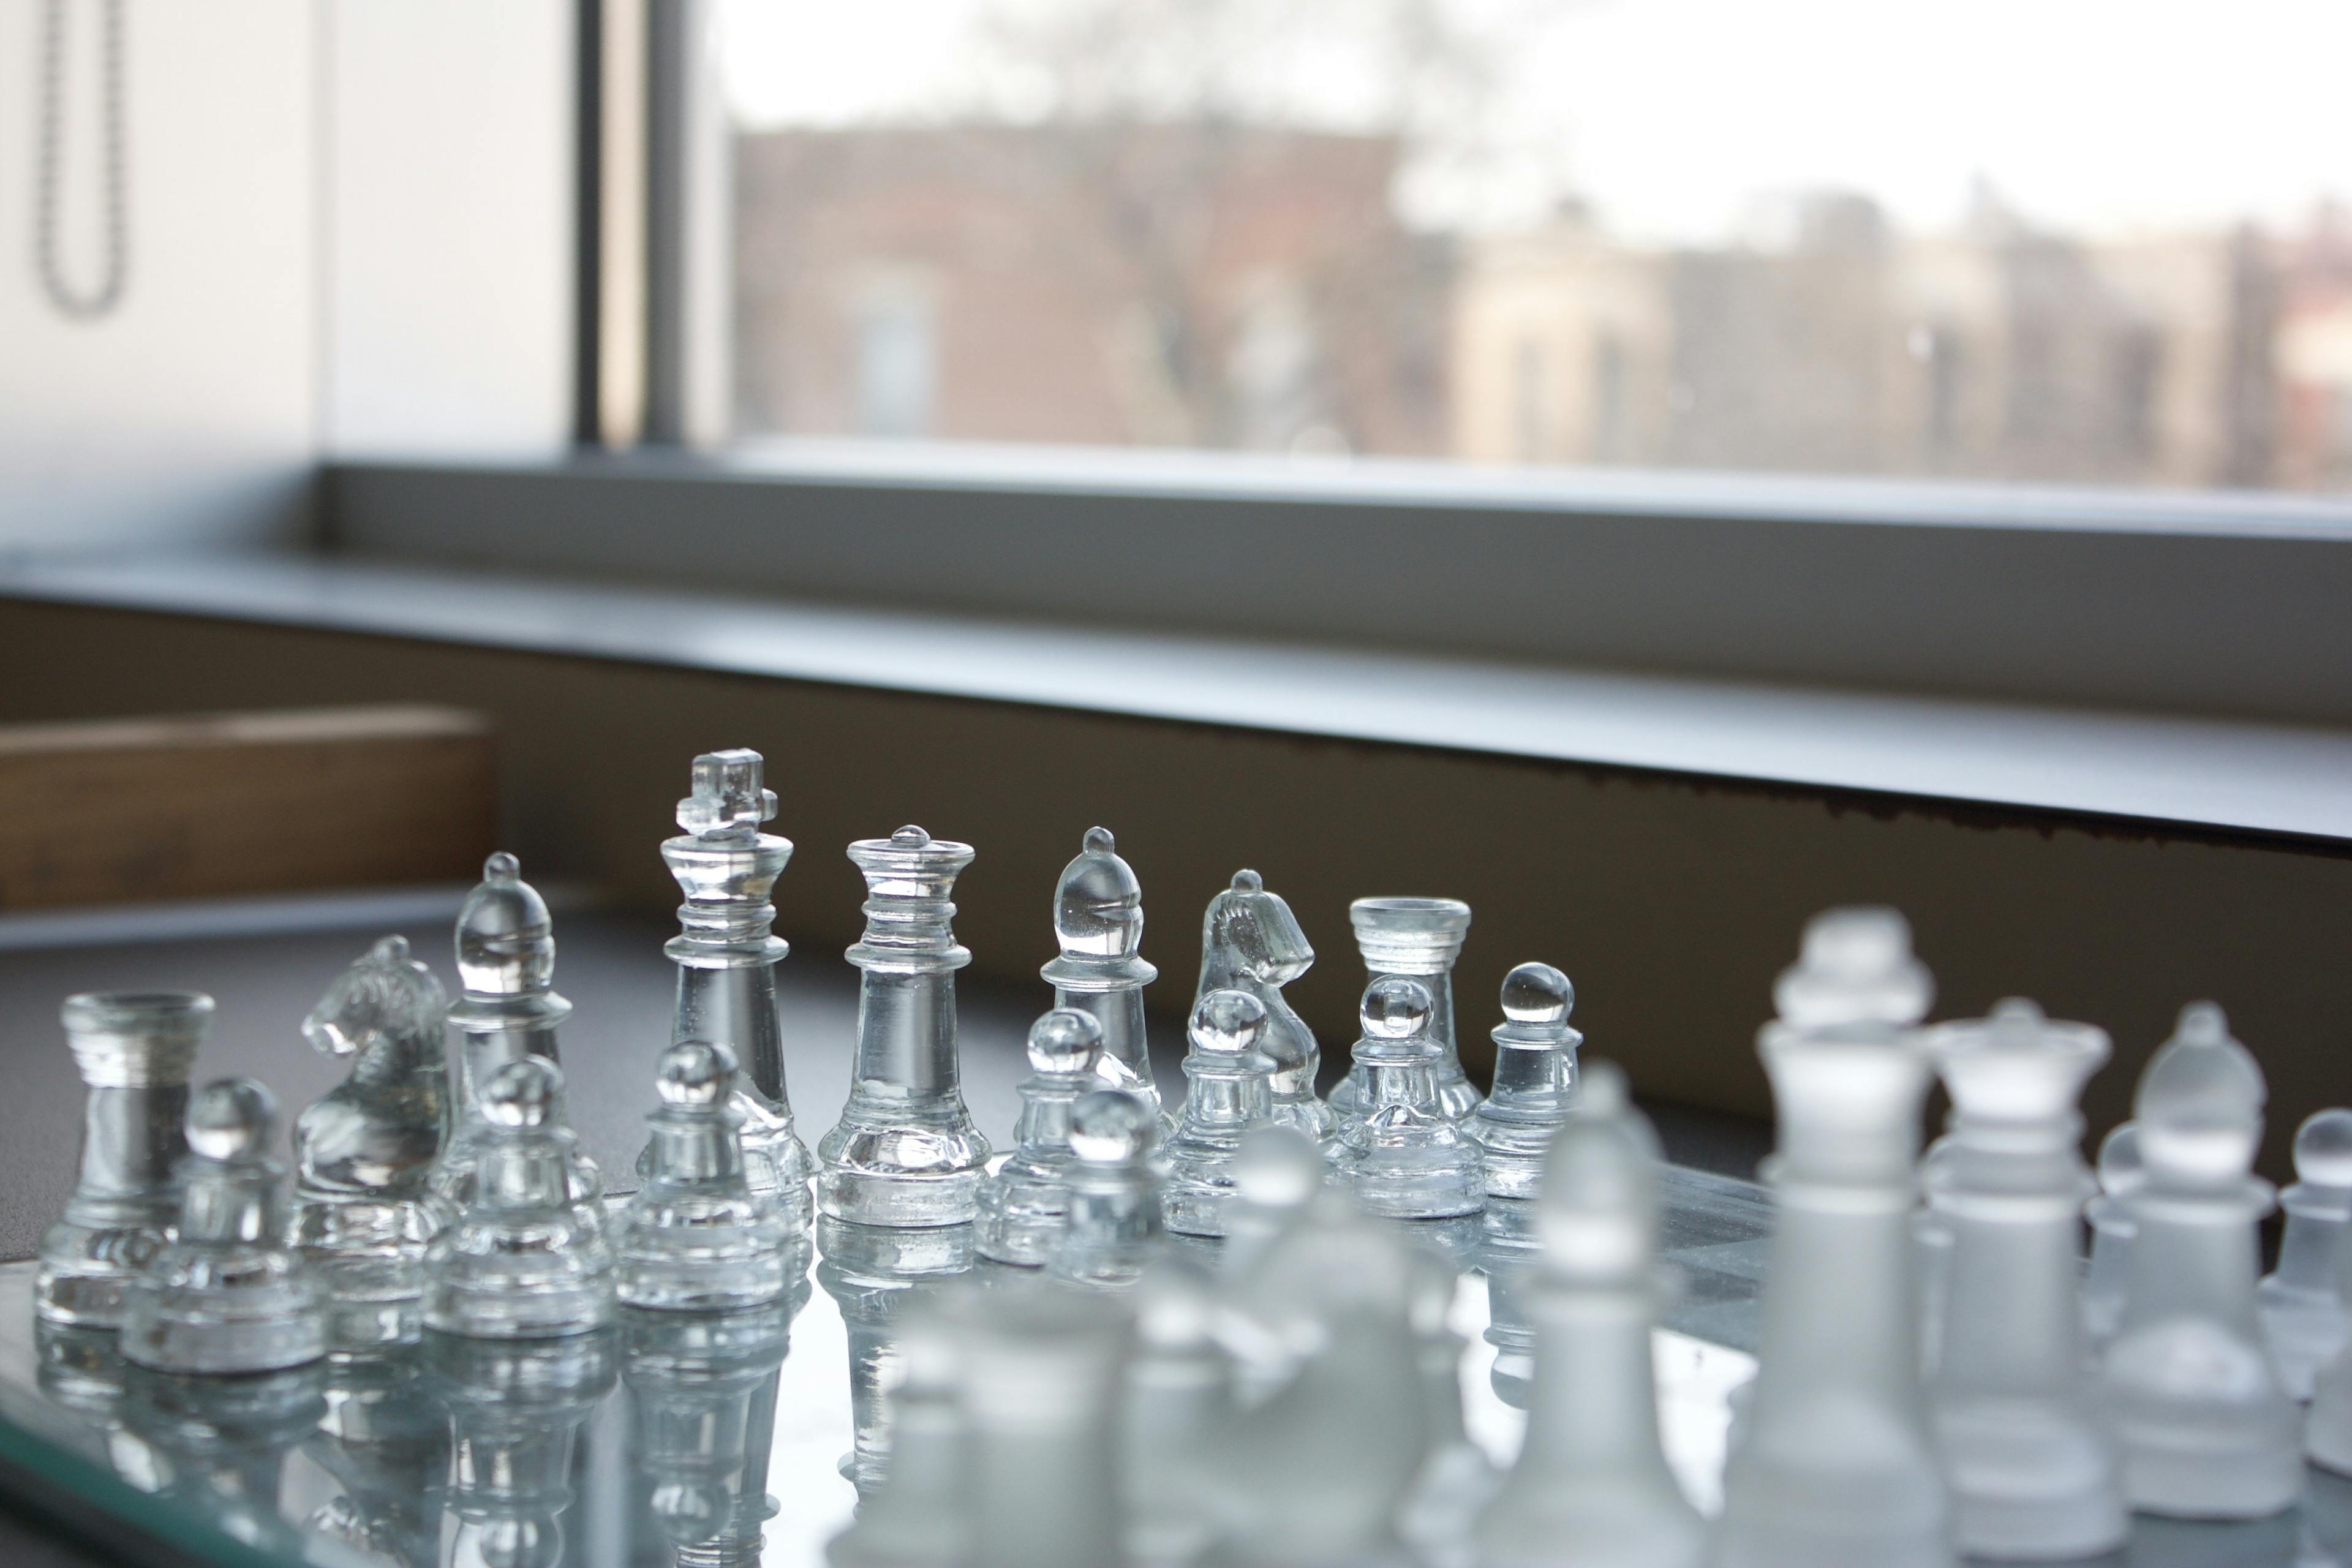 View of a chessboard, angled from above. The blurry outline of a window can be seen in the background.